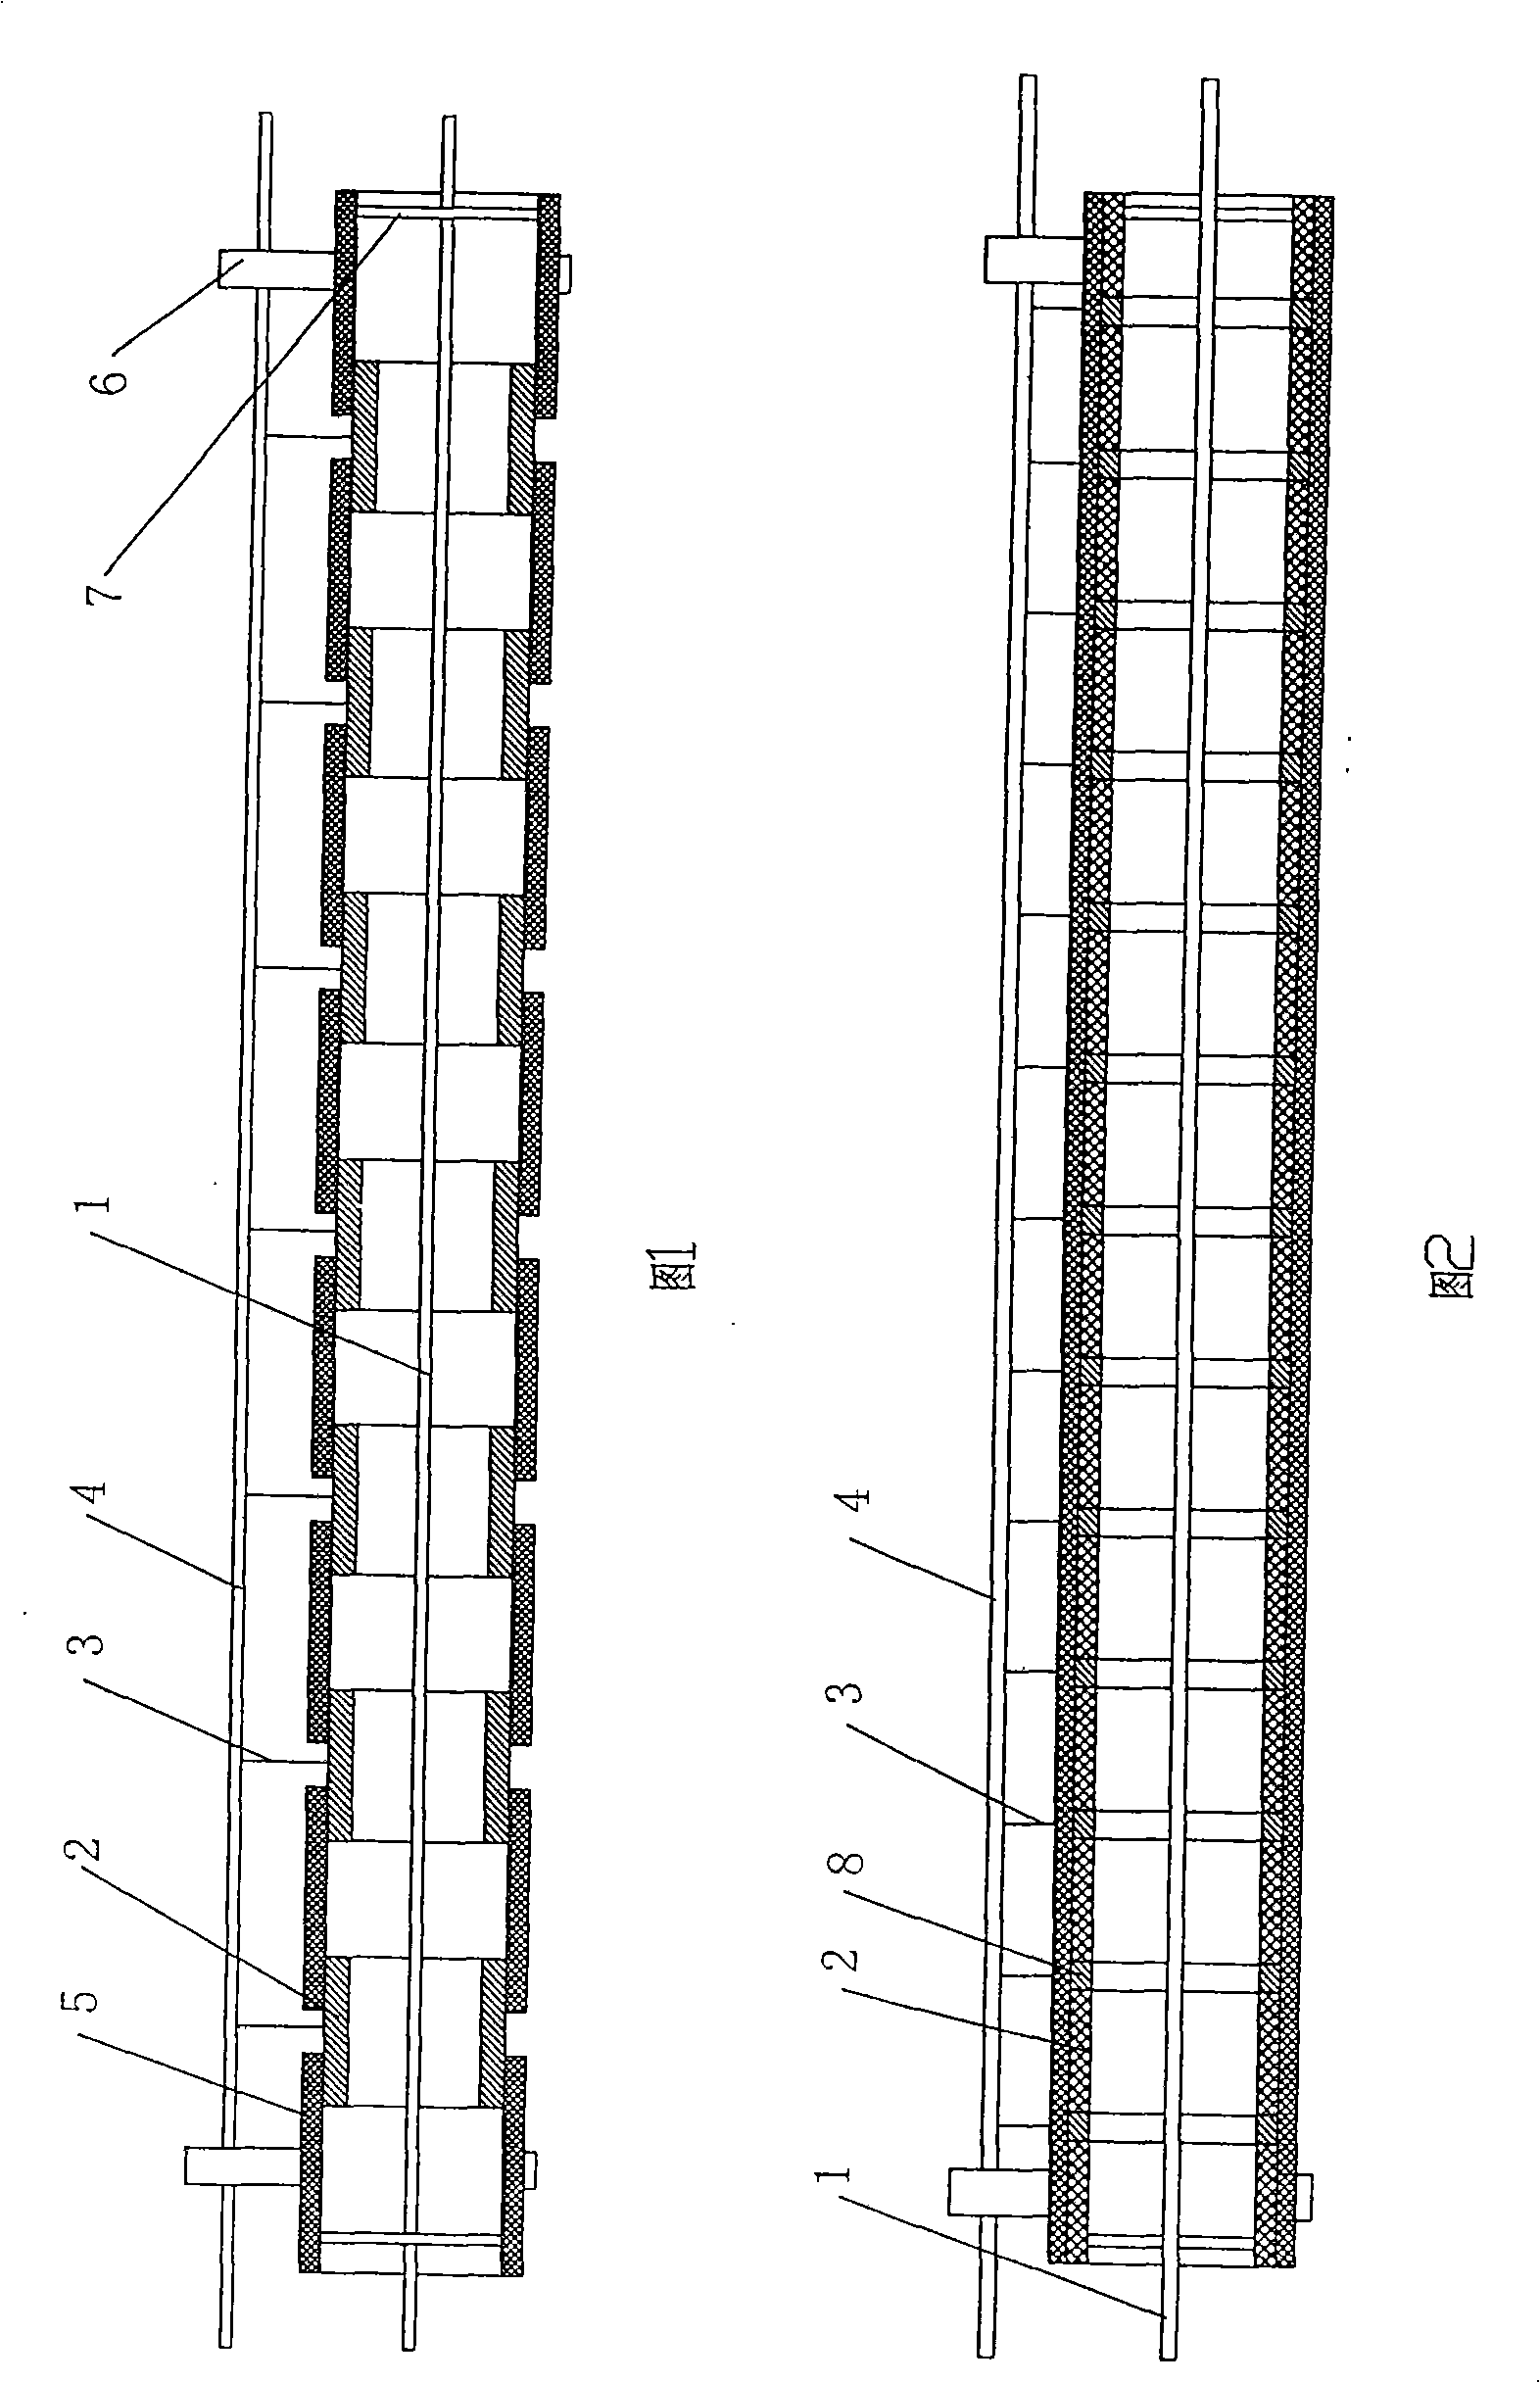 Electrization device for treatment of water